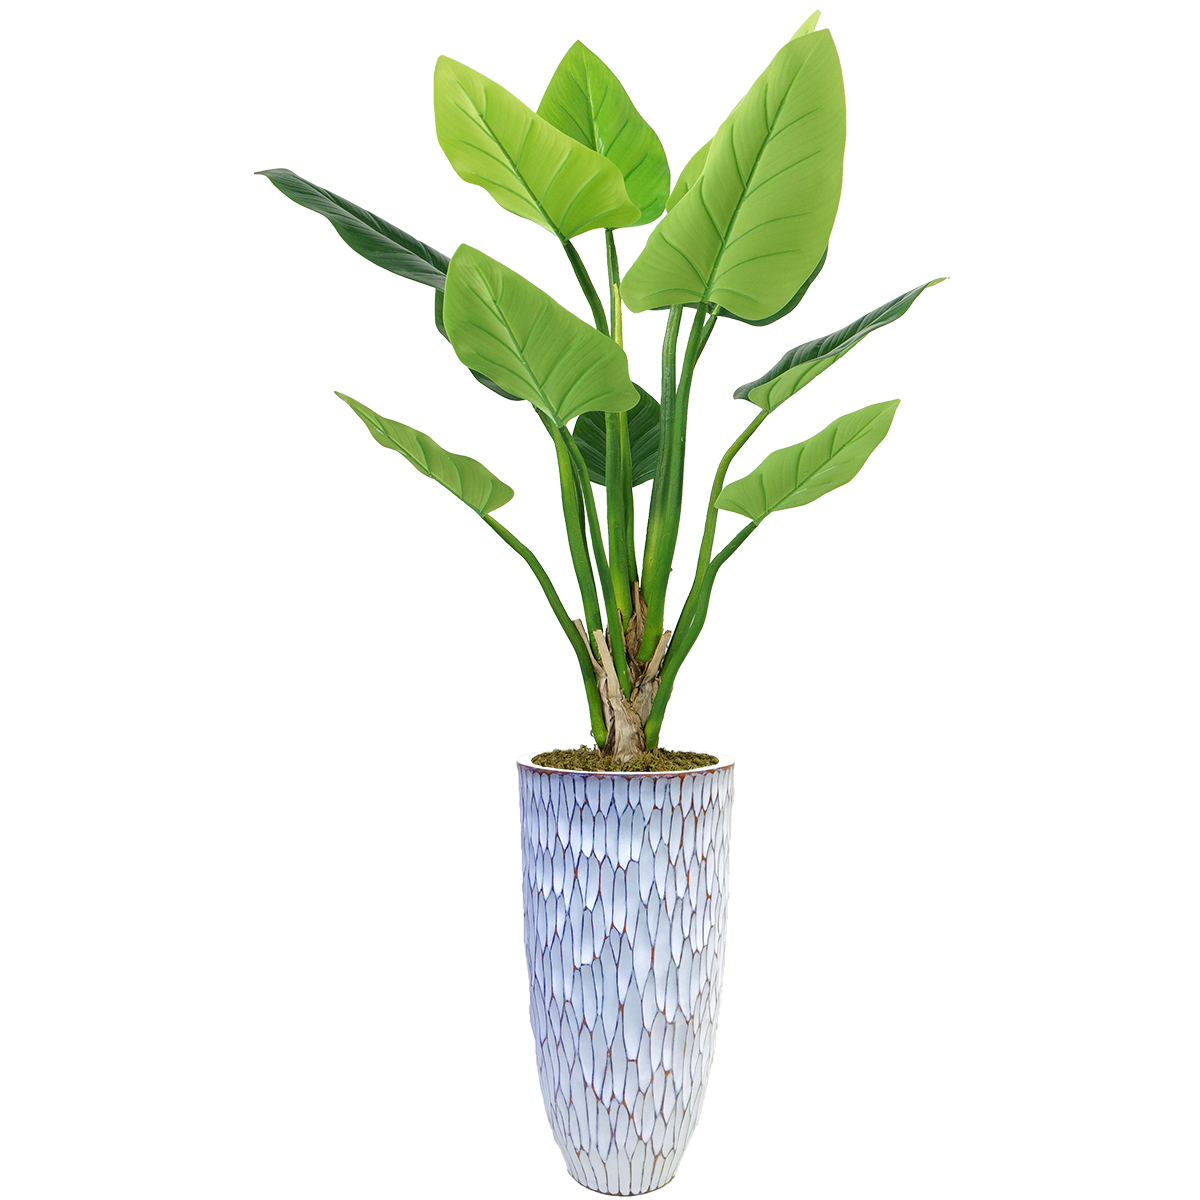 Vhx136219 51.5 In. Philodendron Erubescens Green Emerald Plant In Resin Planter